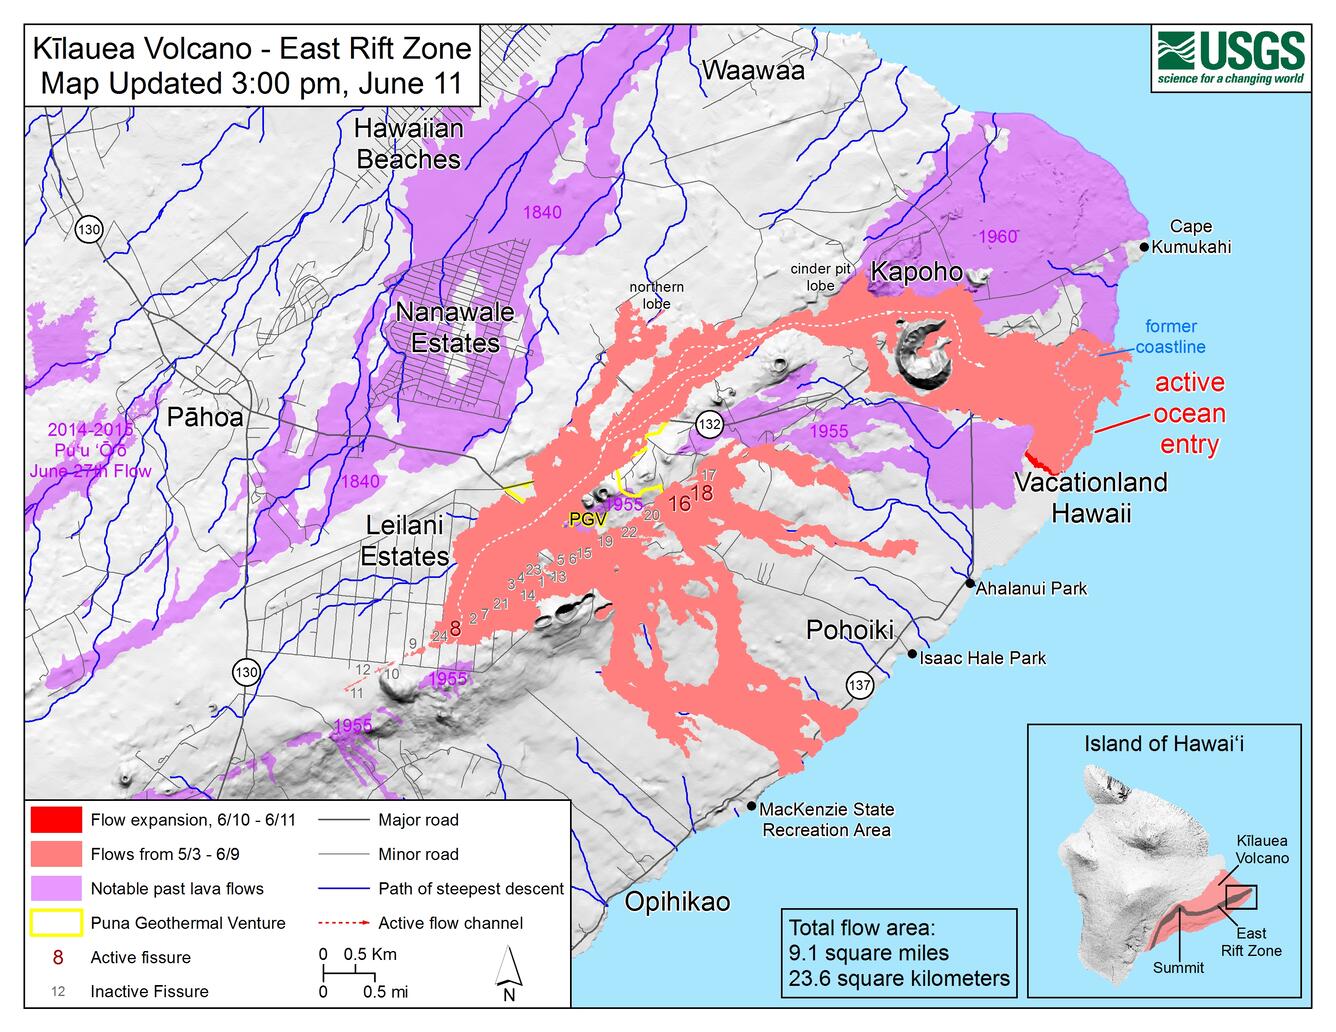 Kīlauea lower East Rift Zone lava flows and fissures, June 11, 3:00...